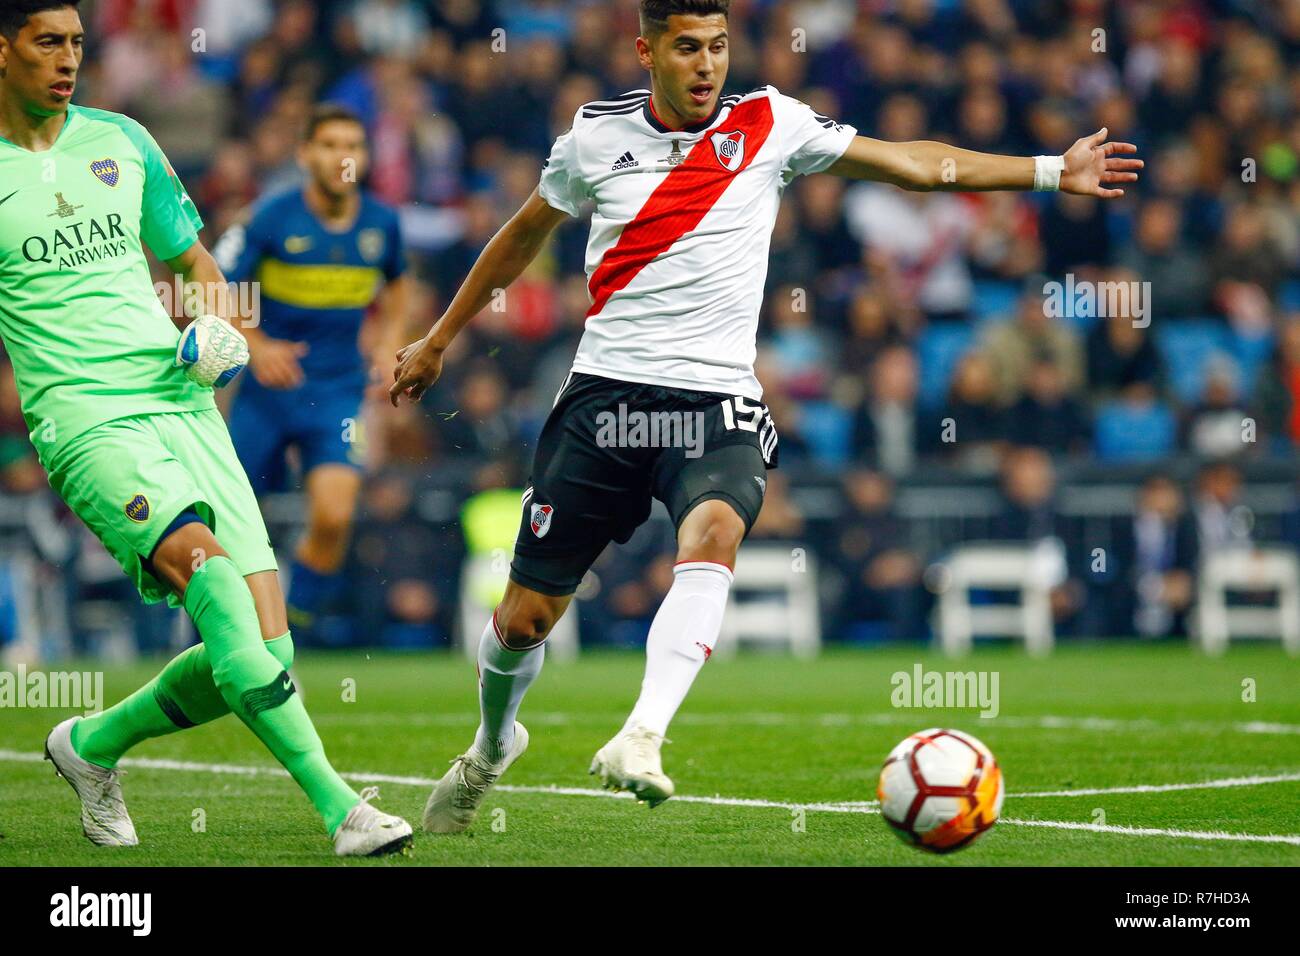 Madrid, Spain. 9th Dec, 2018. Exequiel Alejandro Palacios (right) fights for the ball with Guillermo Sara (Boca Juniors) (left) during the second leg match between River Plate and Boca Juniors as part of the Finals of Copa CONMEBOL Libertadores 2018 at Estadio Santiago Bernabeu in Madrid.River Plate won the title of Copa Libertadores 2018 by beating Boca Juniors. Credit: Manu Reino/SOPA Images/ZUMA Wire/Alamy Live News Stock Photo